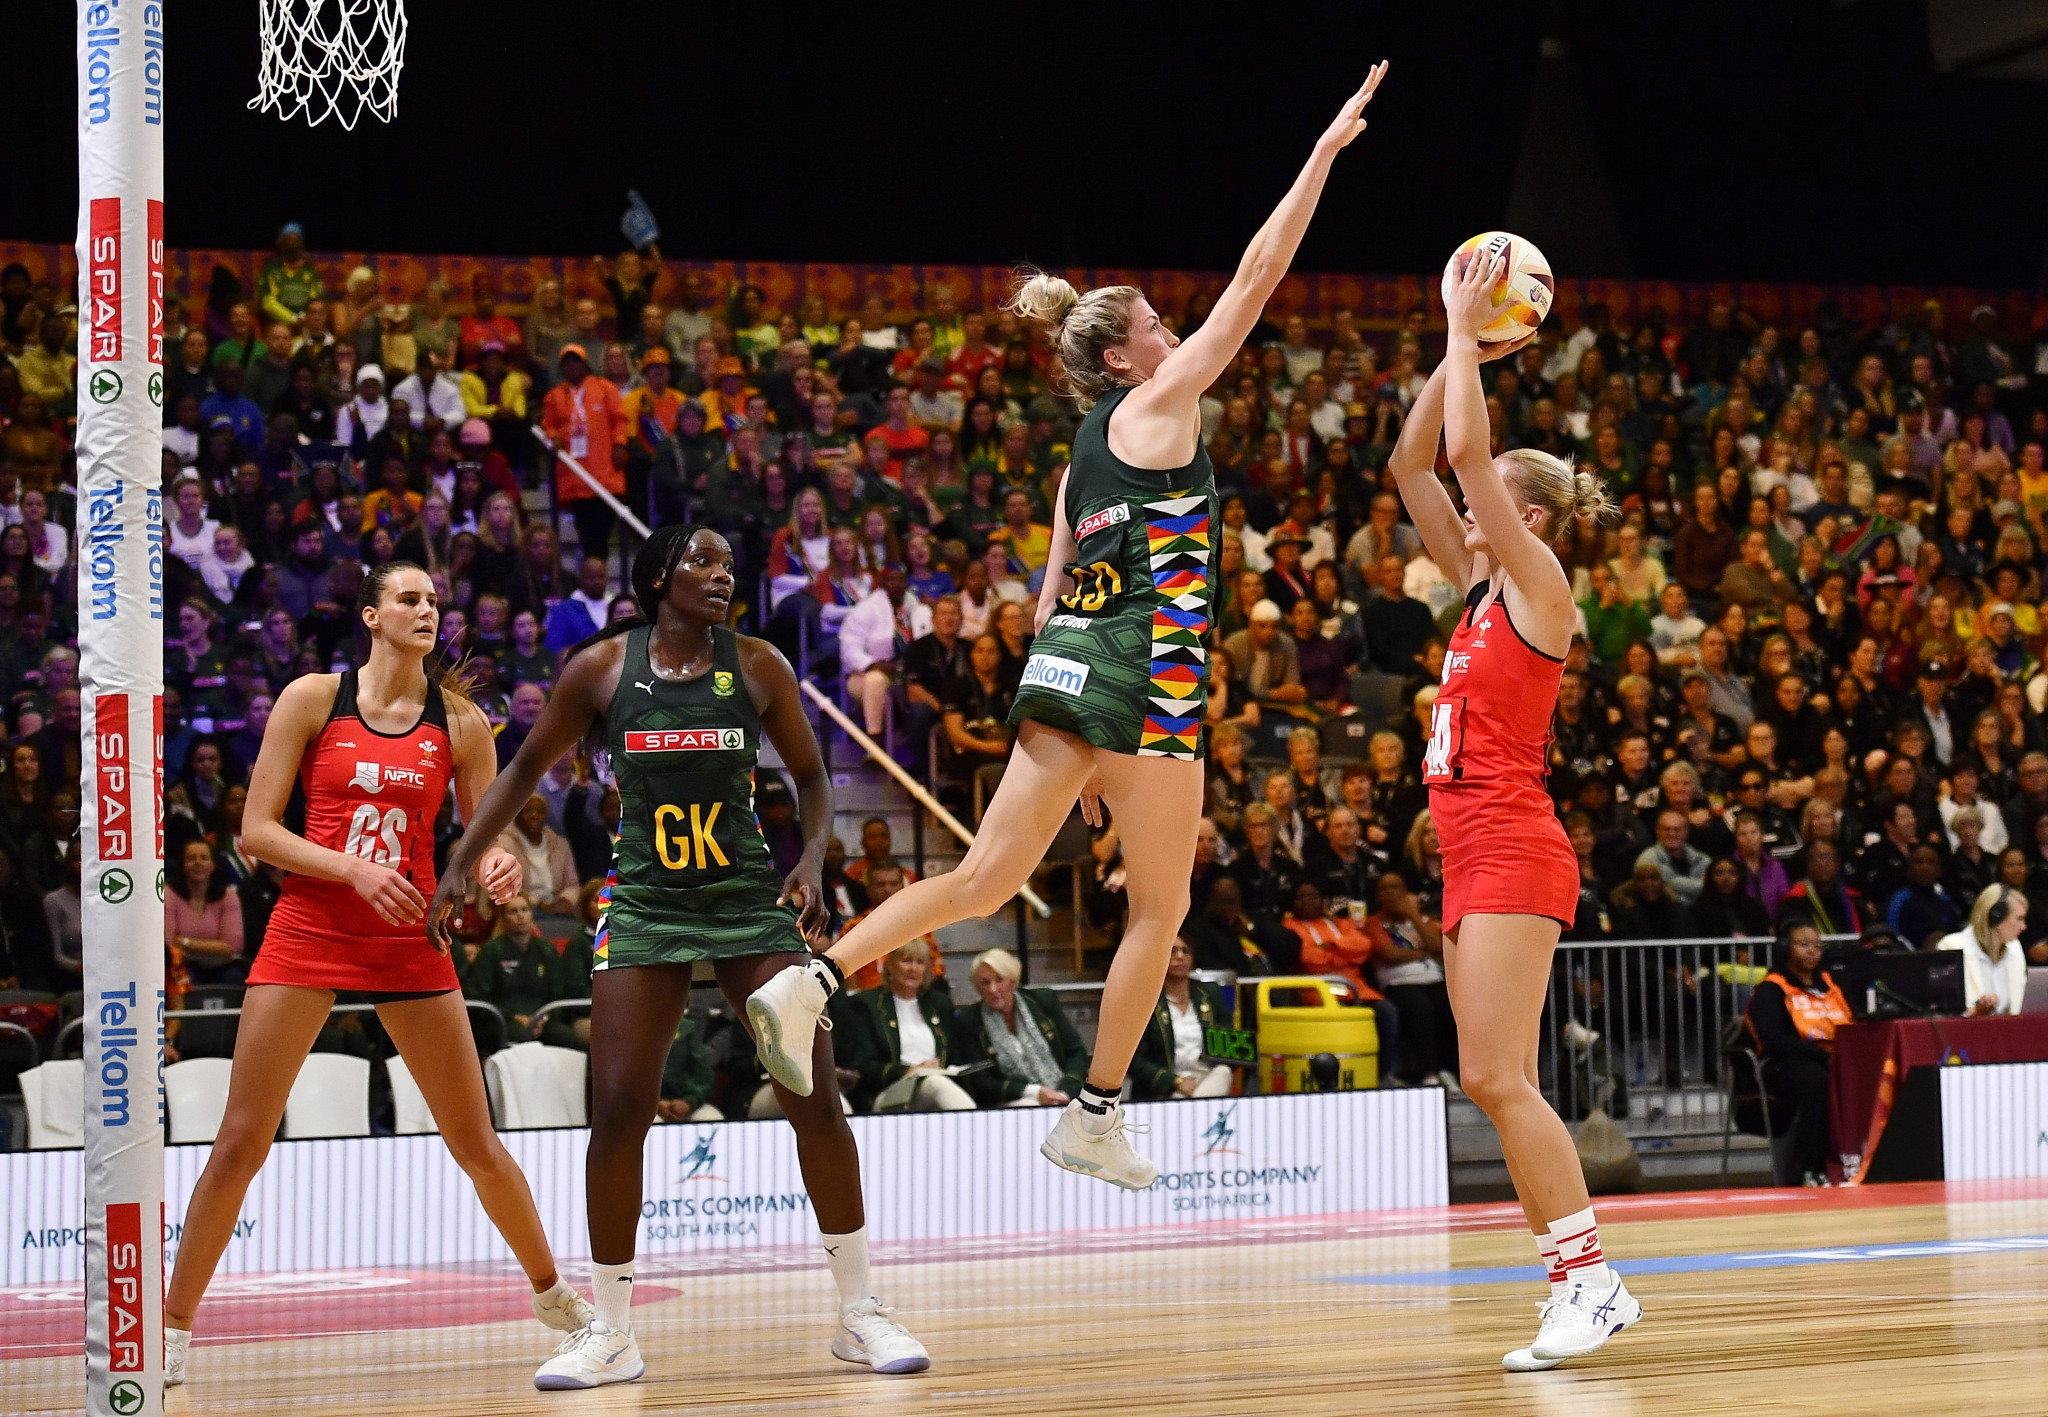 South Africa began their home Netball World Cup campaign in front of a fervent Cape Town crowd ©Getty Images